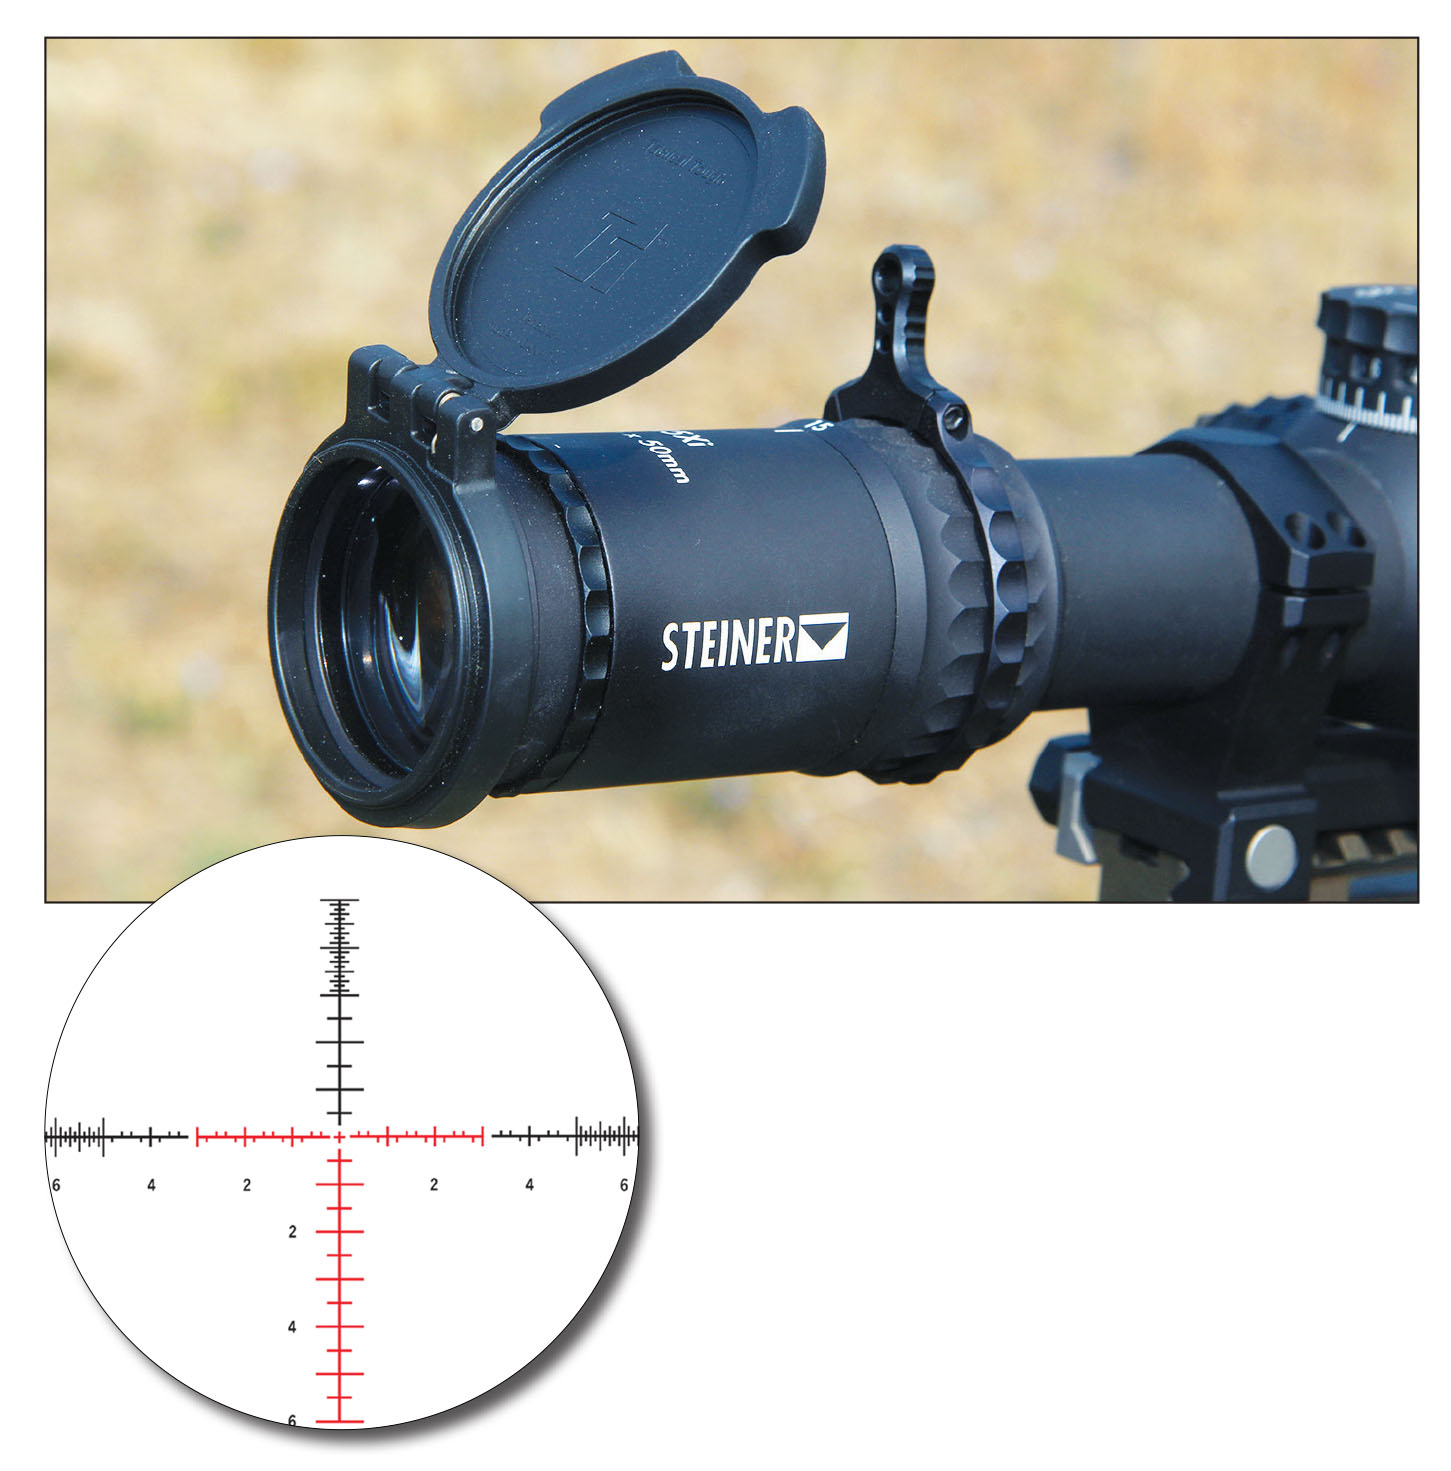 T5Xi Series riflescopes are supplied with spring-loaded protective lens caps (front and rear) to keep dust and moisture out.